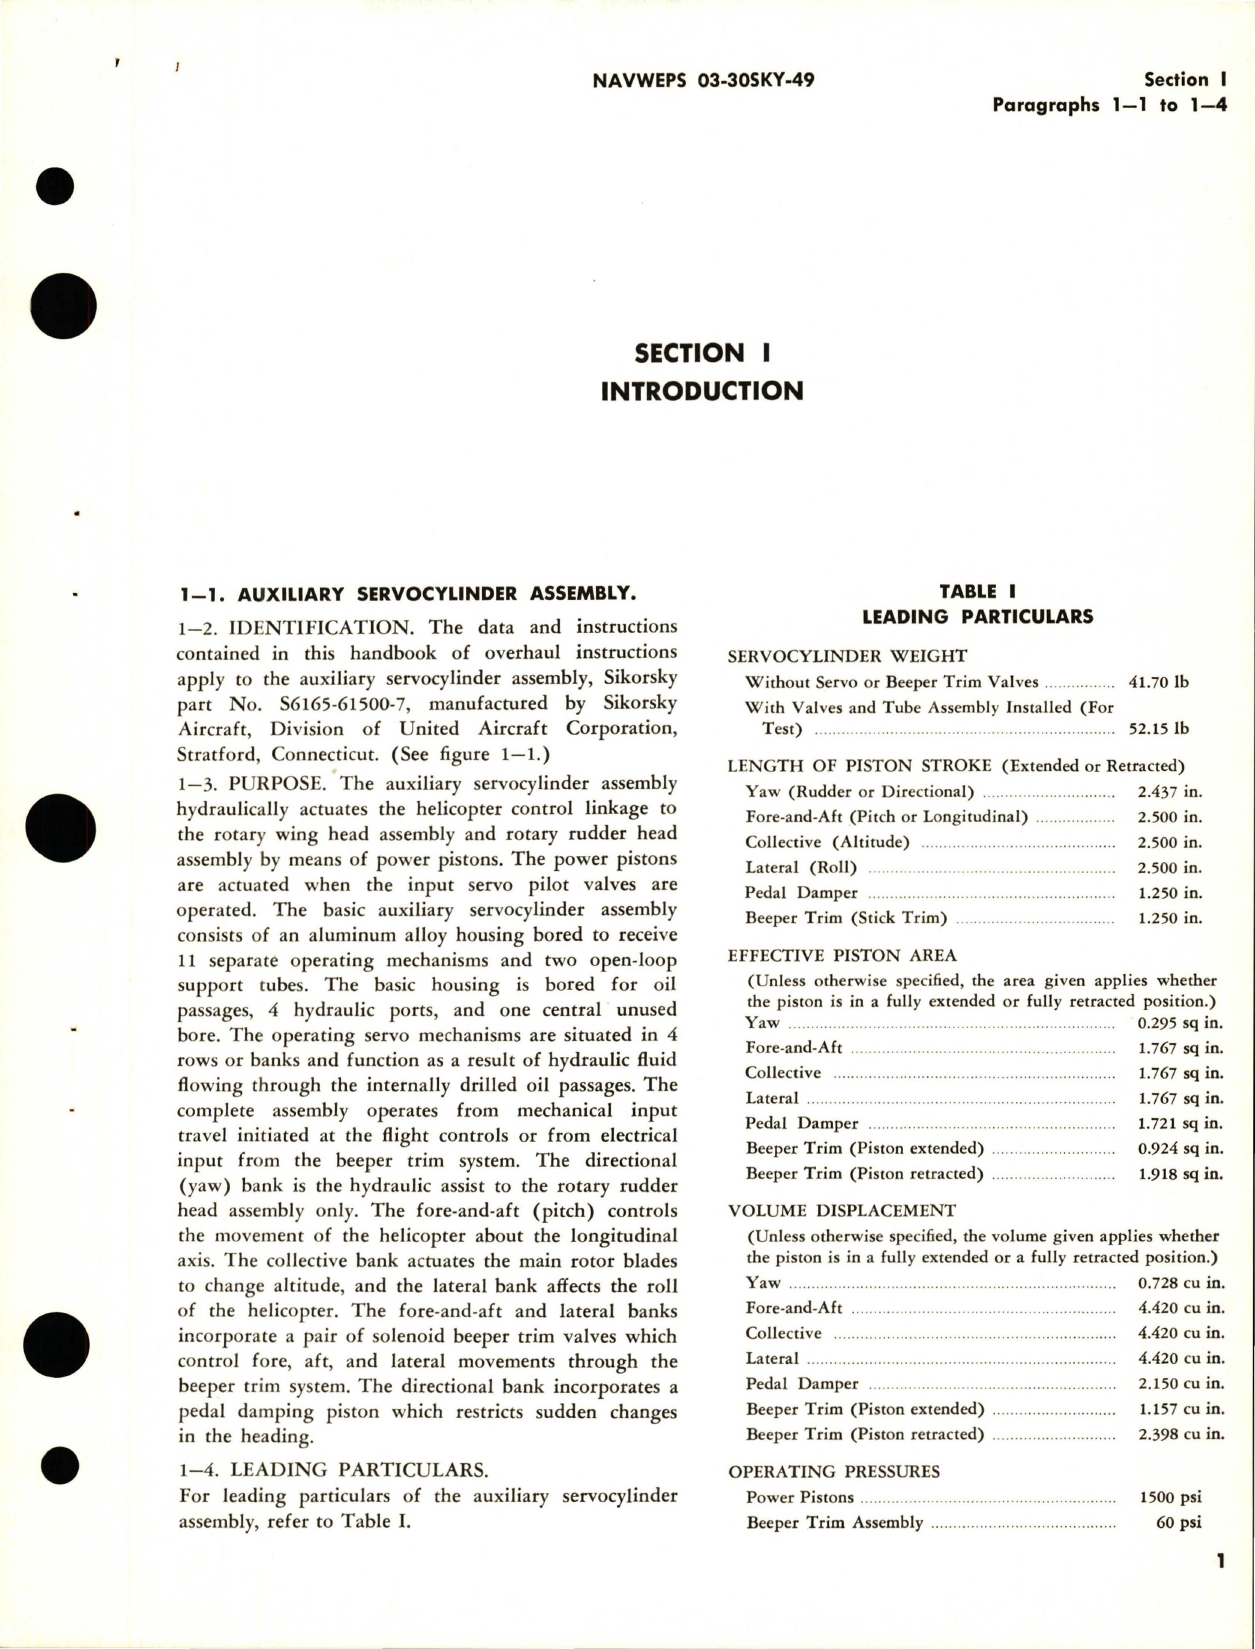 Sample page 5 from AirCorps Library document: Overhaul Instructions for Auxiliary Servocylinder Assembly - Parts S6165-61500-7 